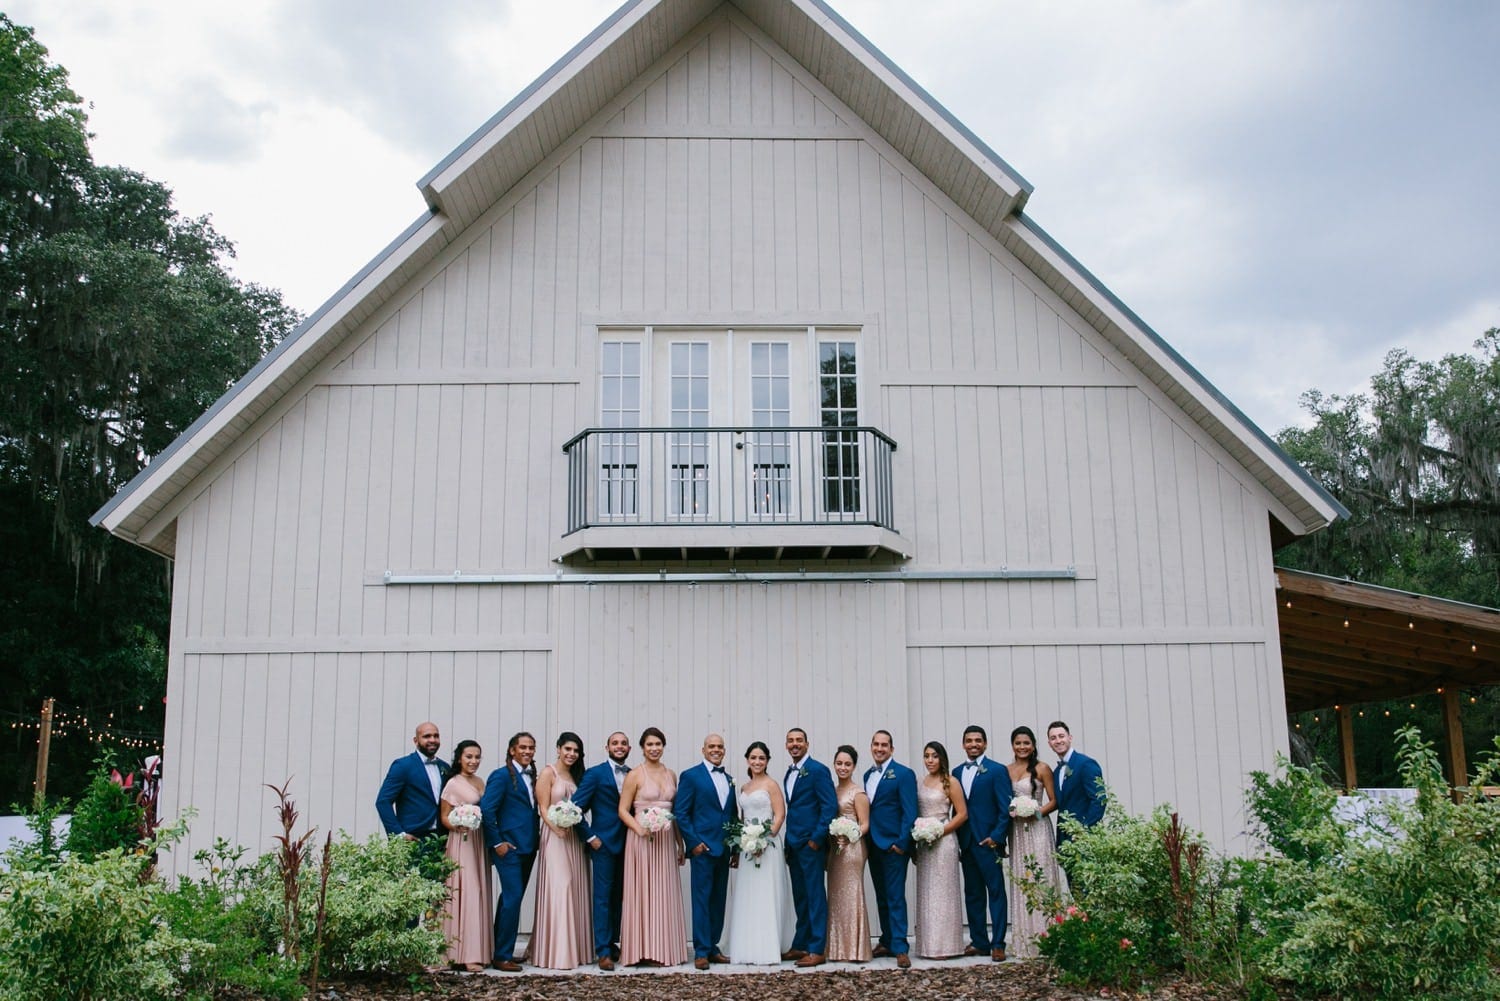 Stunning bridal party wearing blush gowns and royal blue suits at October Oaks Farm. The perfect style for a country chic wedding.